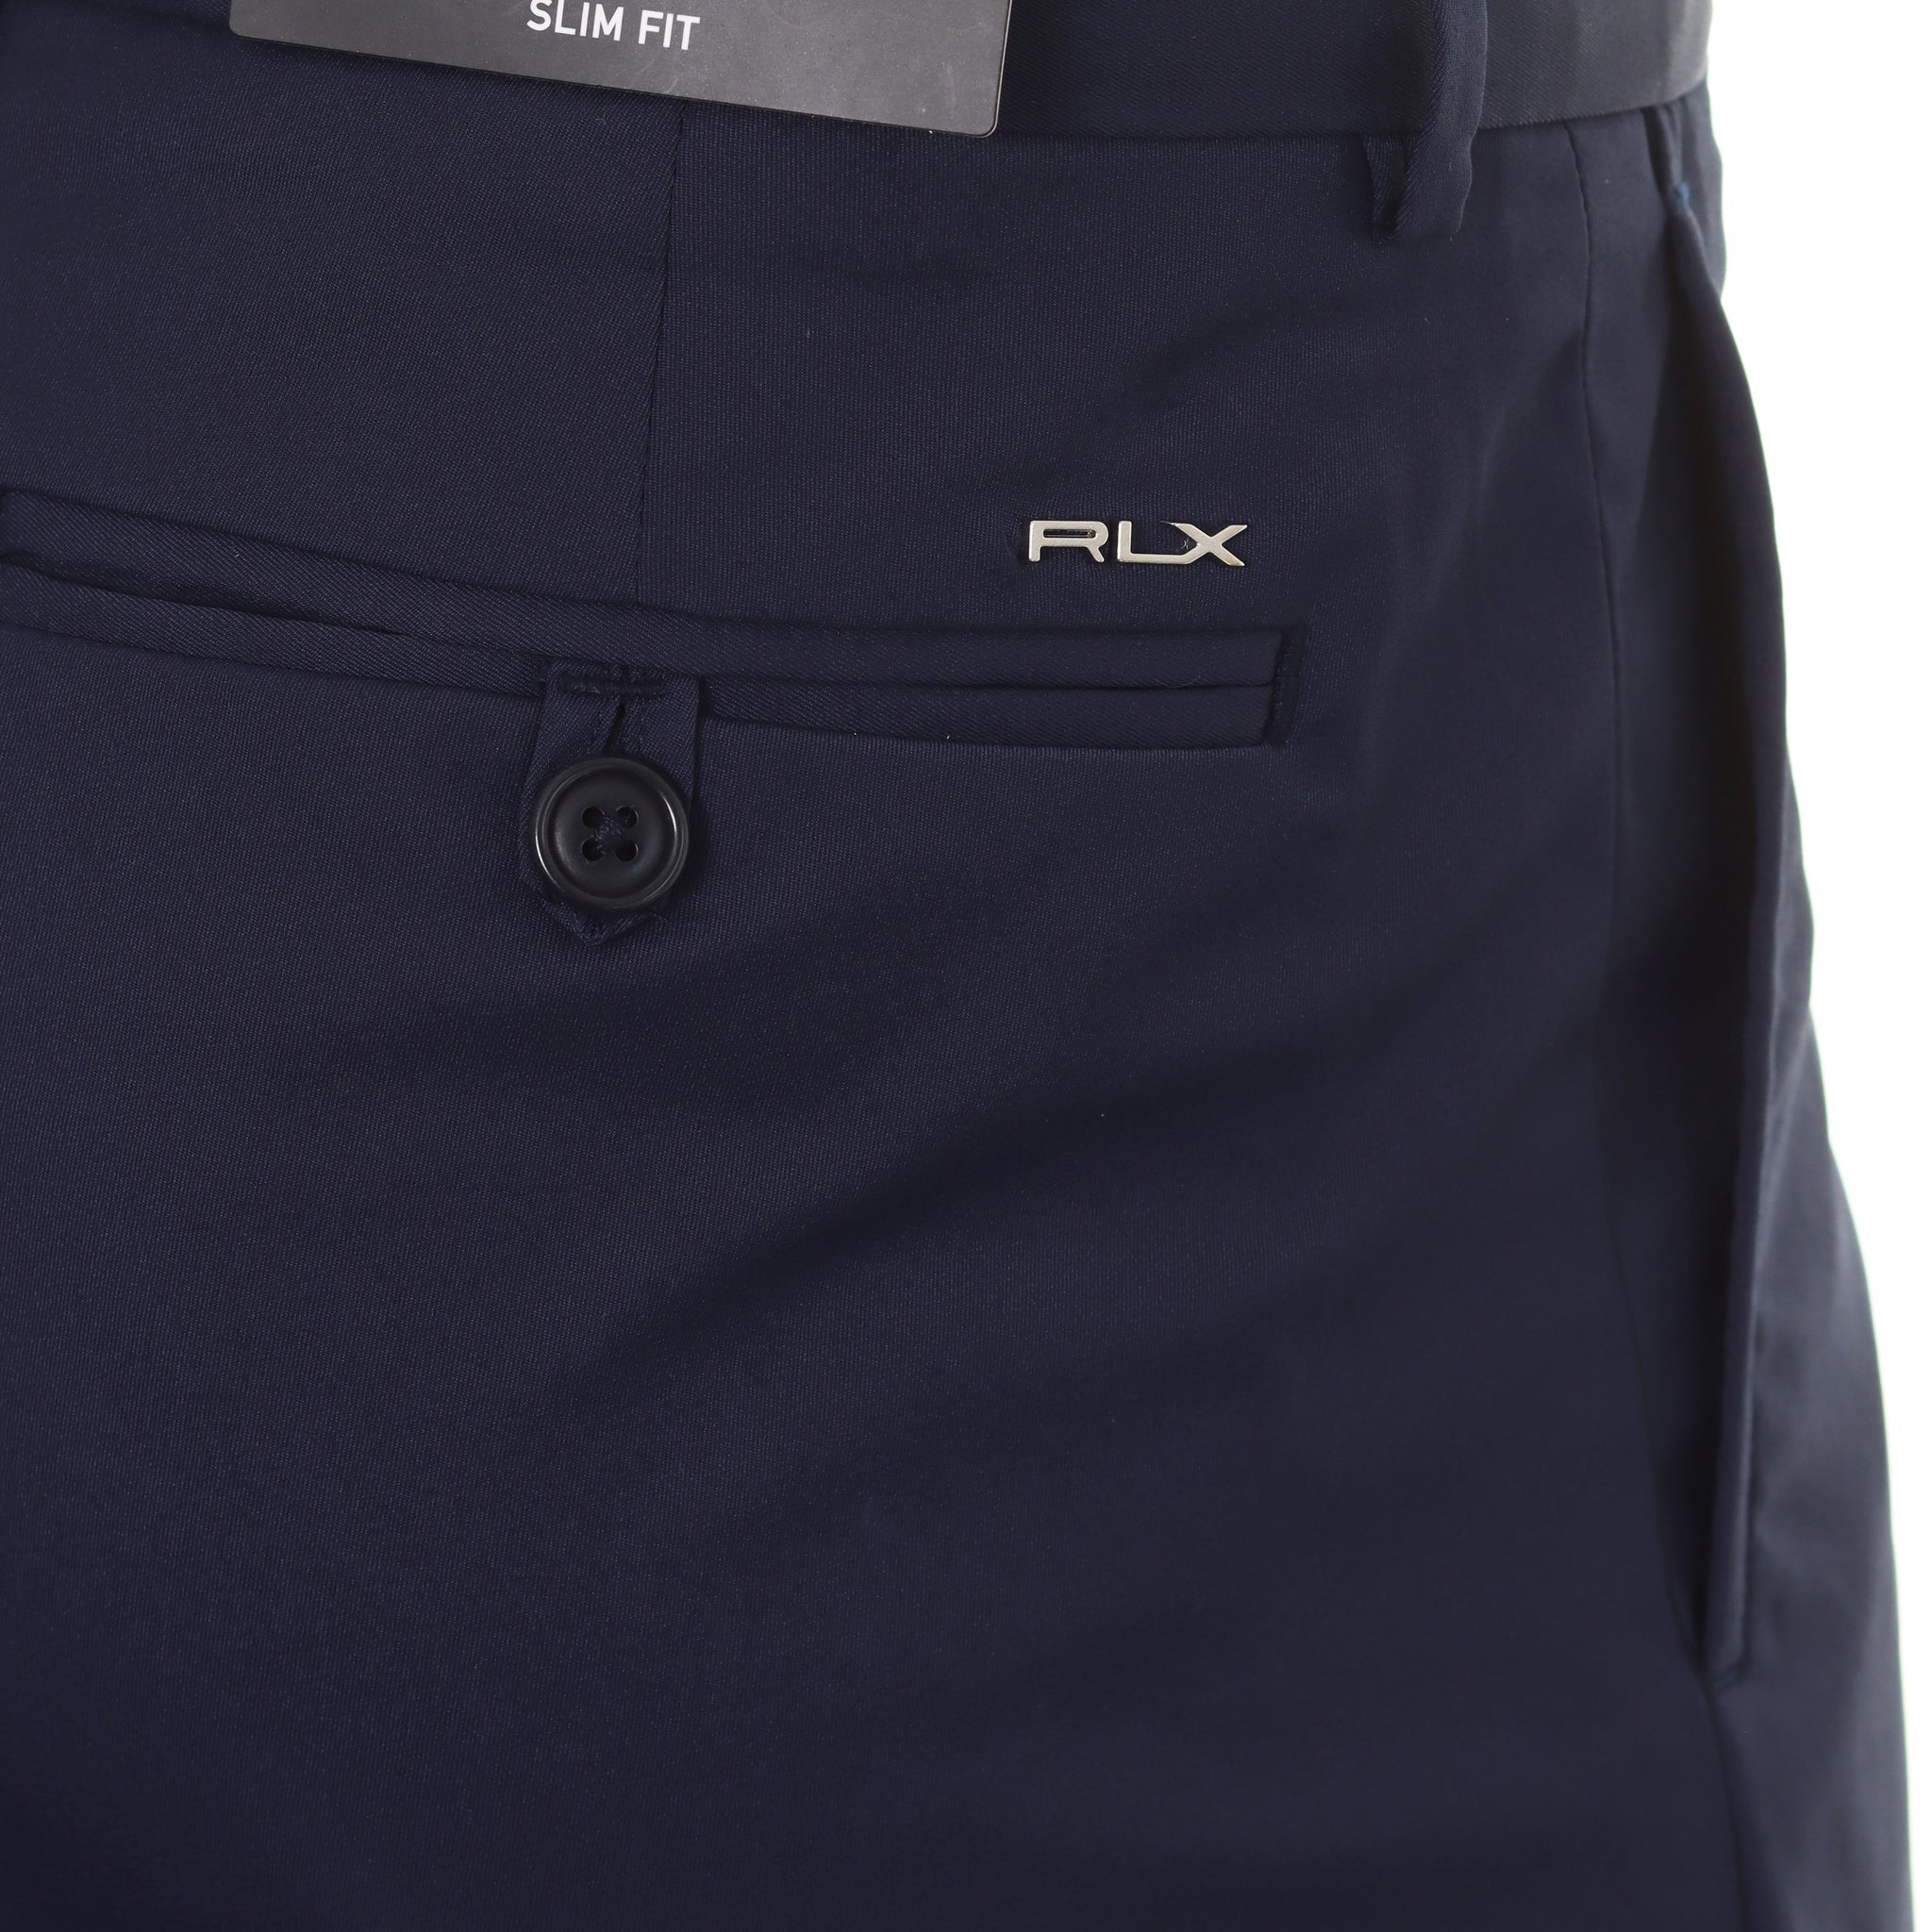 rlx-ralph-lauren-stretch-slim-fit-trousers-785865208-french-navy-001